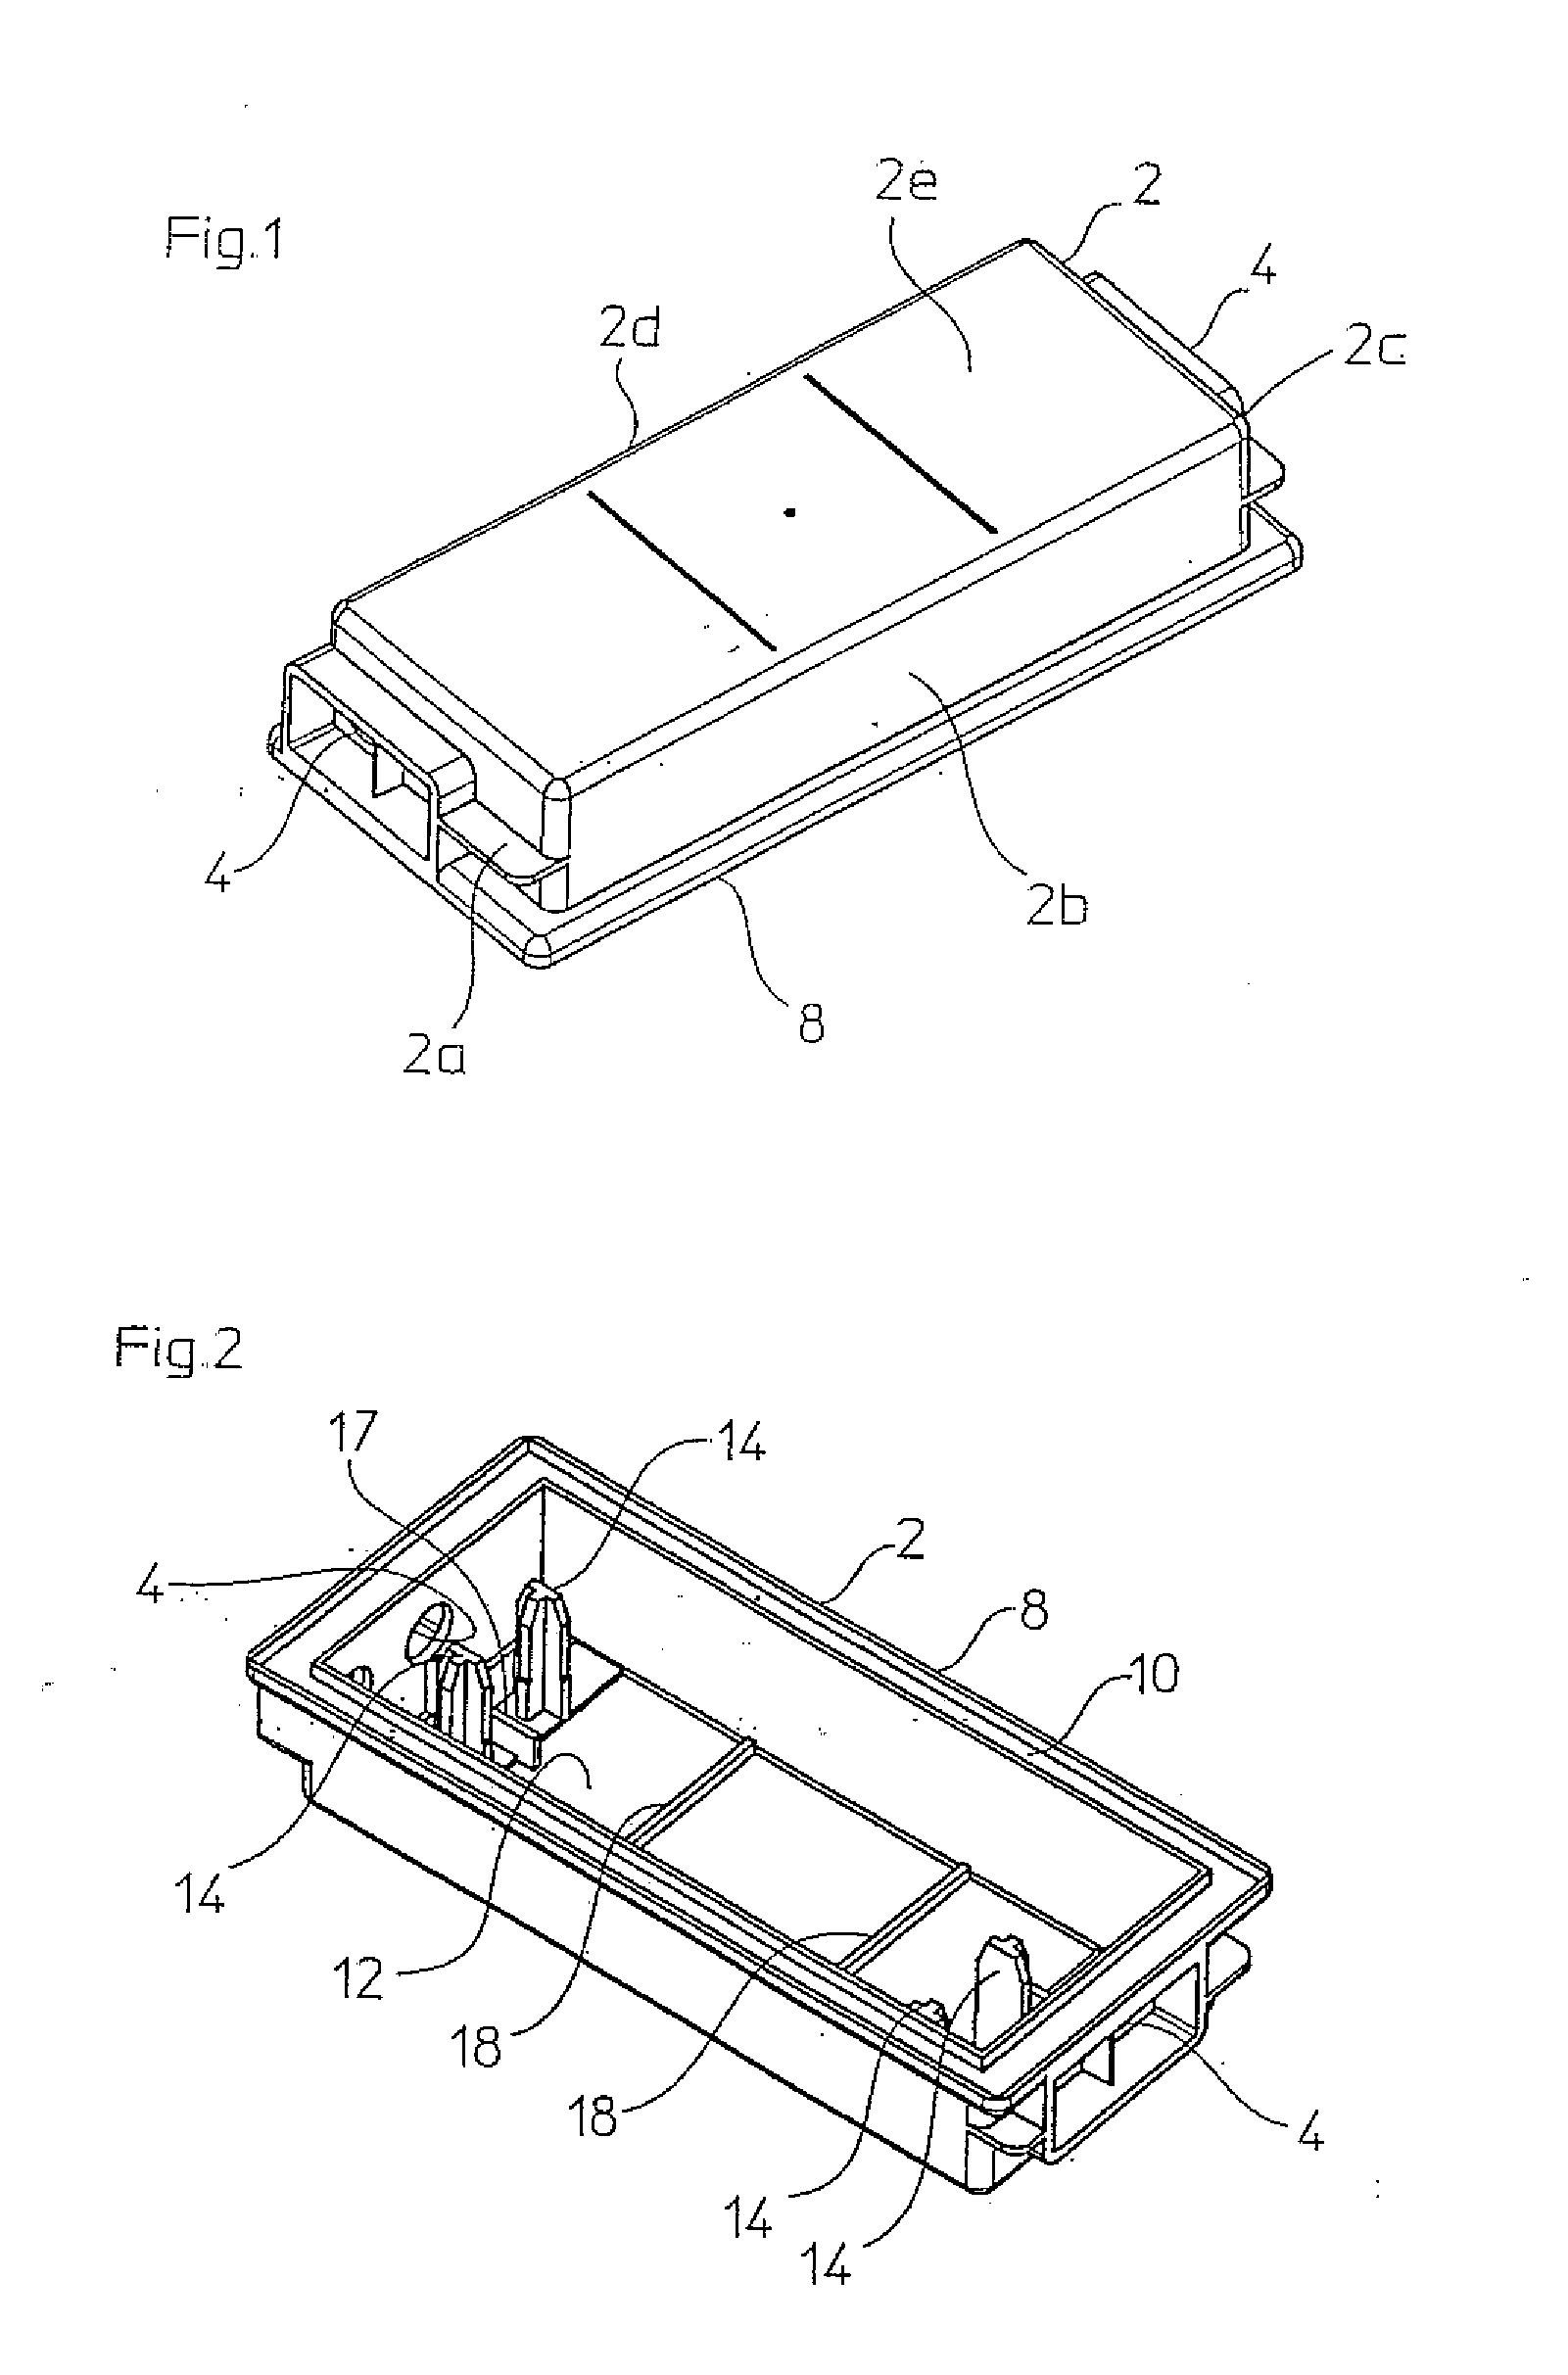 Connection and Junction Box for a Solar Module